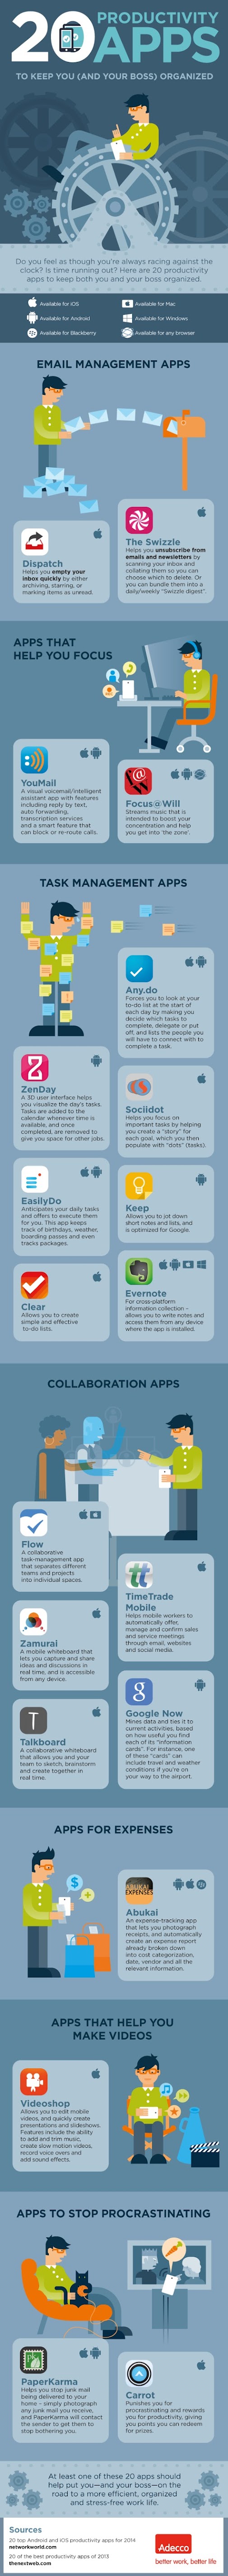 https://www.adeccousa.com/resources/best-productivity-apps-to-keep-your-team-organized/~/media/AdeccoGroup/Brands/Adecco%20Global%202016/USA/media/images/job-seekers/resources/infographics/twenty-productivity-apps.jpg